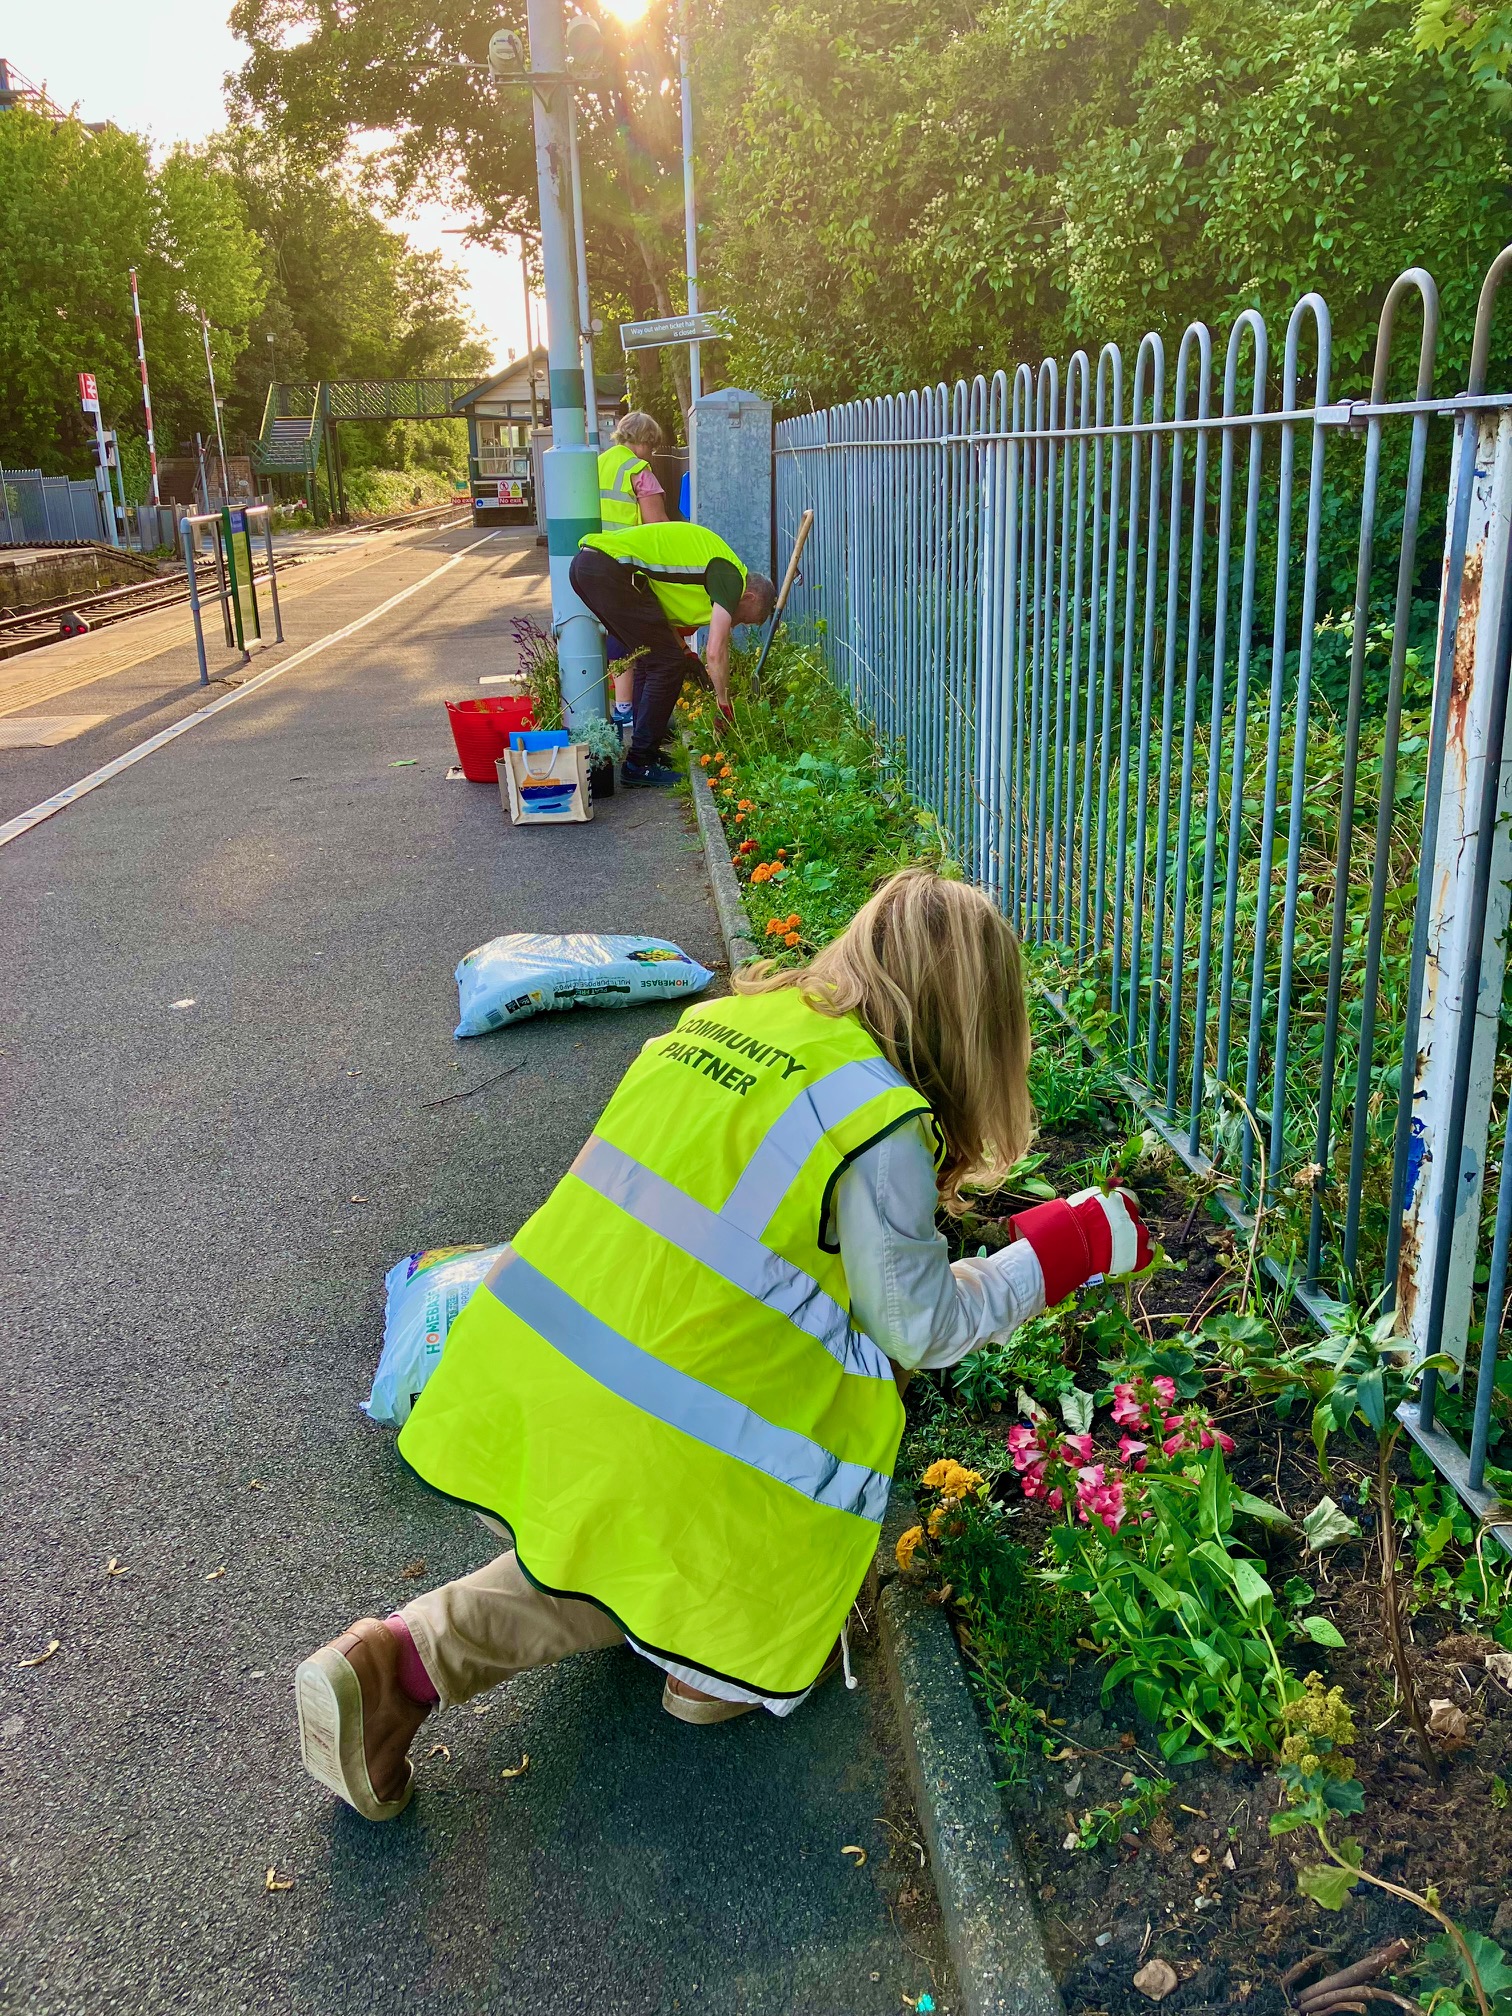 Volunteers from Growing Redhill and Loveworks, Reigate, work hard to make our local railway platforms a joy to visit; clearing and planting beds and planters to provide not only a gorgeous visual display for travellers but also vital pollinator pathways for all sorts of insects. A wonderful example of community transformational urban greening across the local borough.